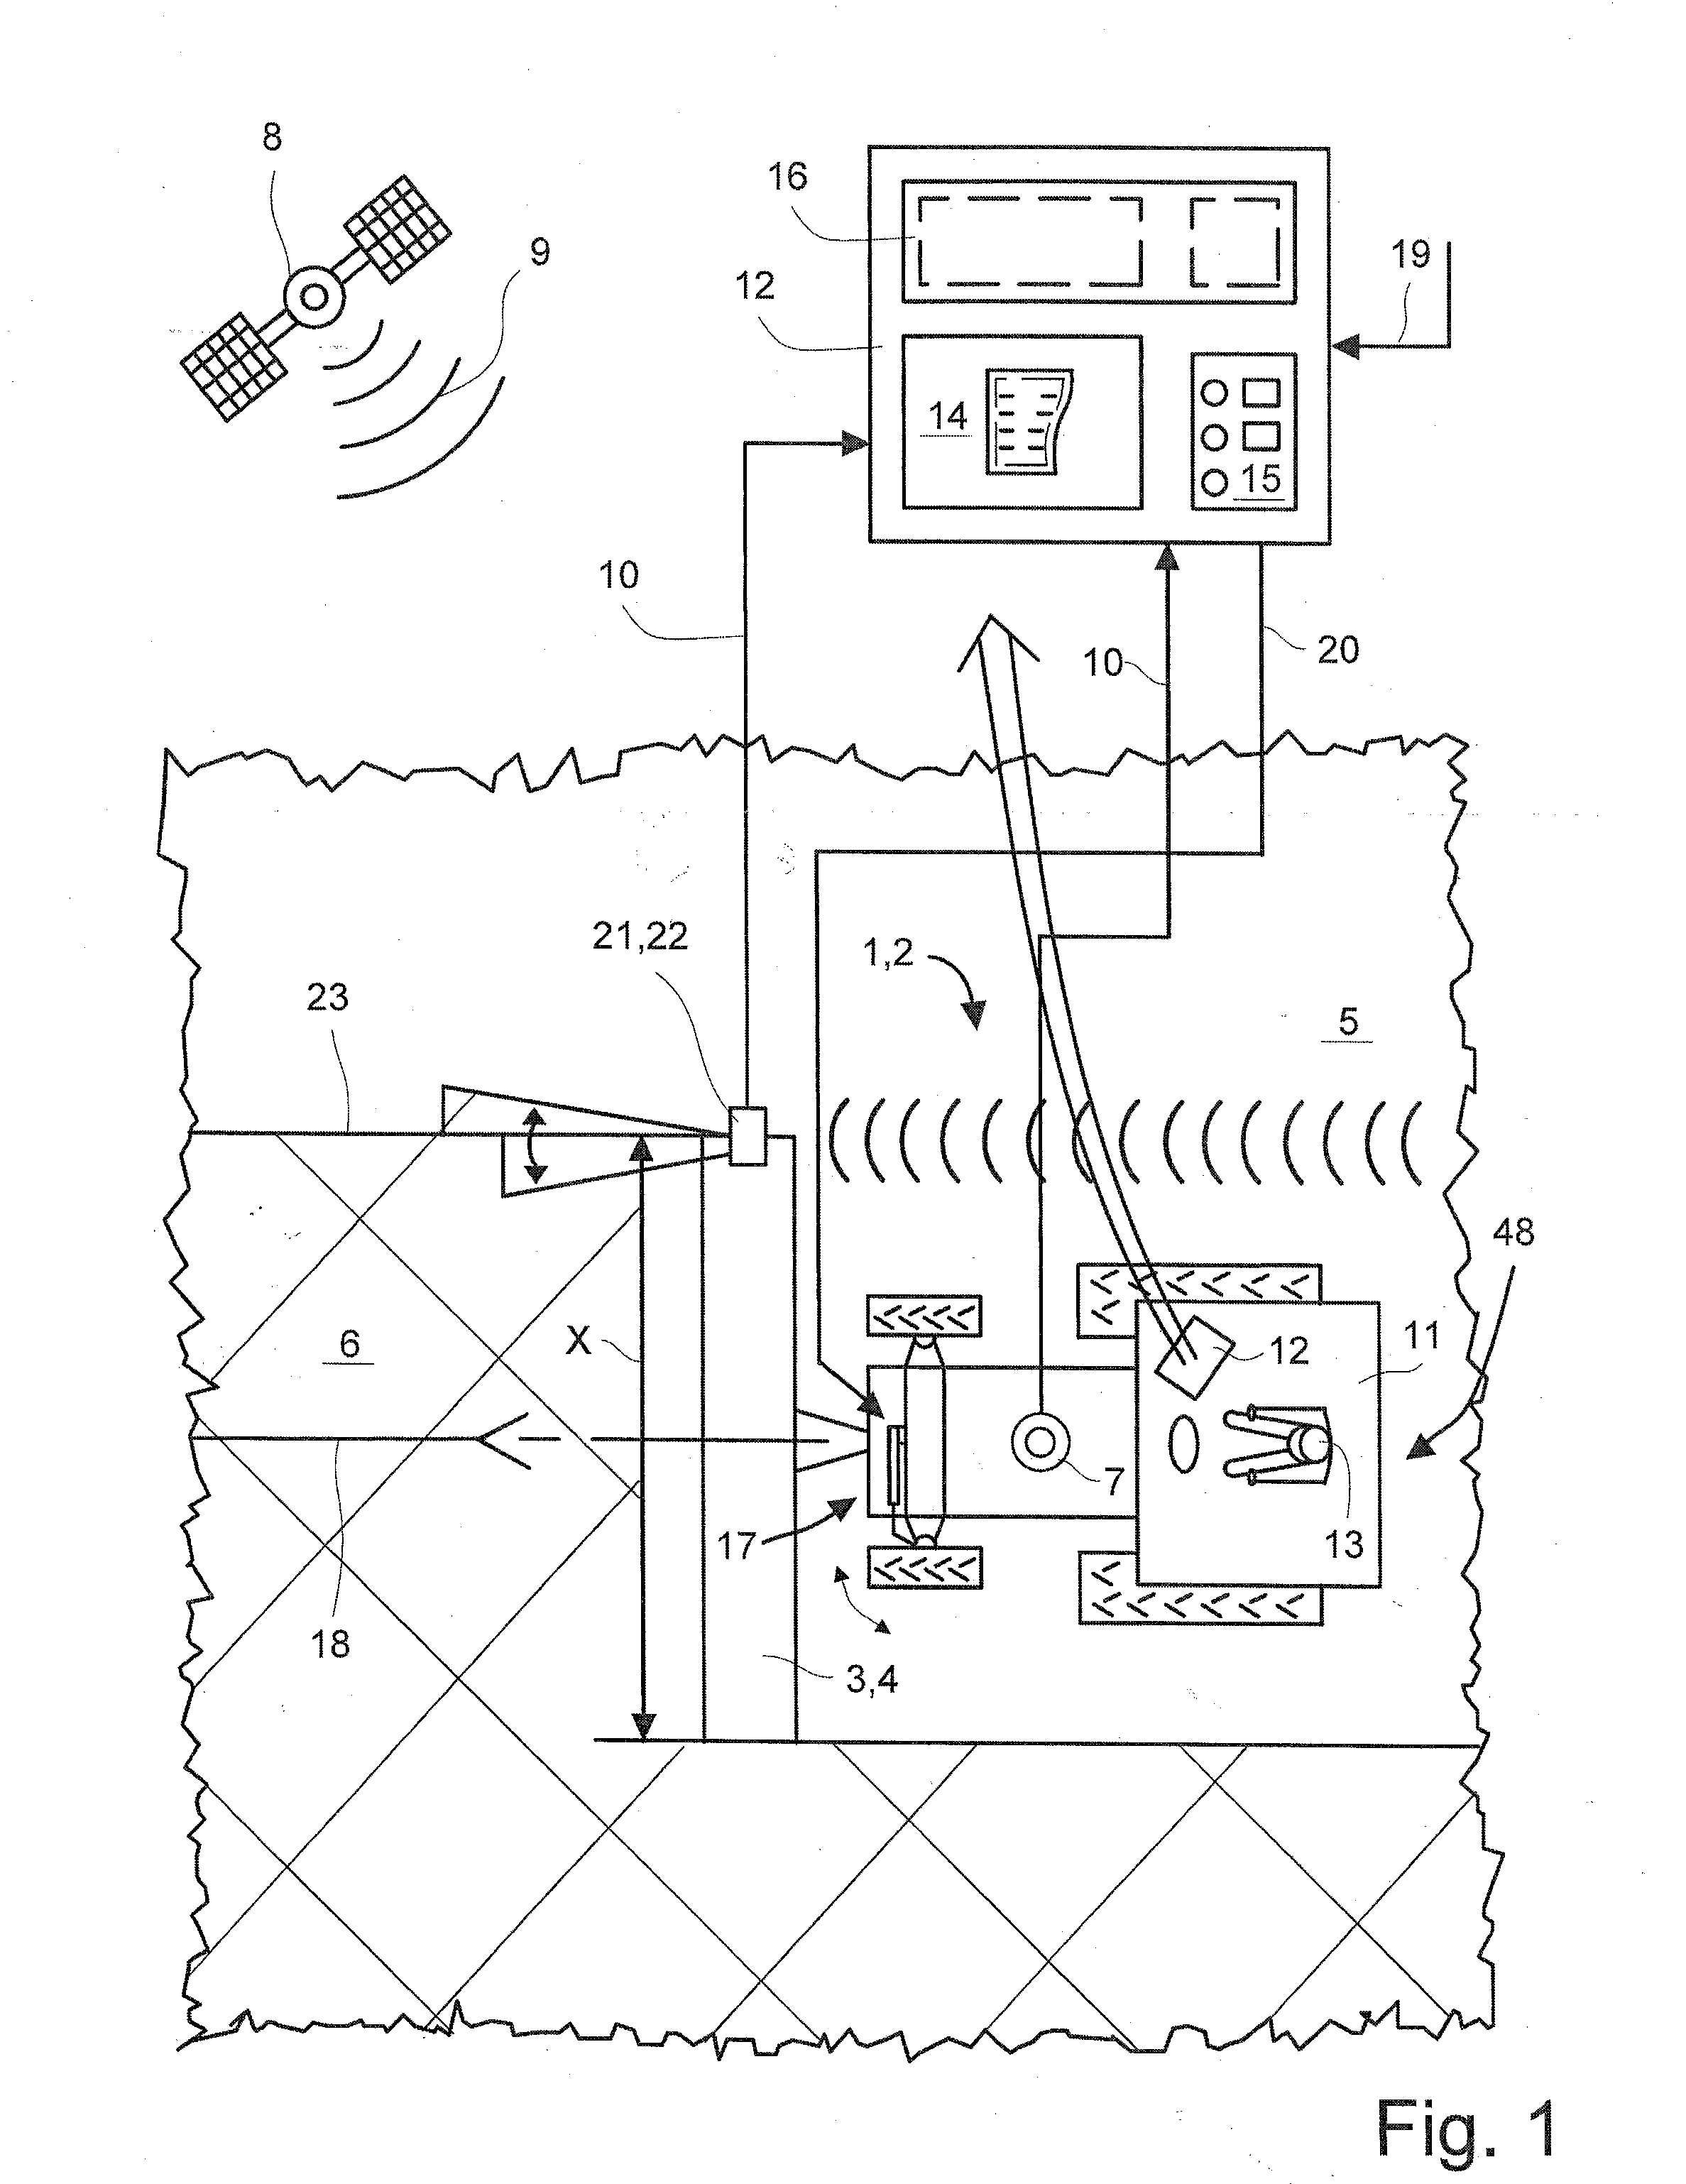 Method and device for displaying vehicle movements